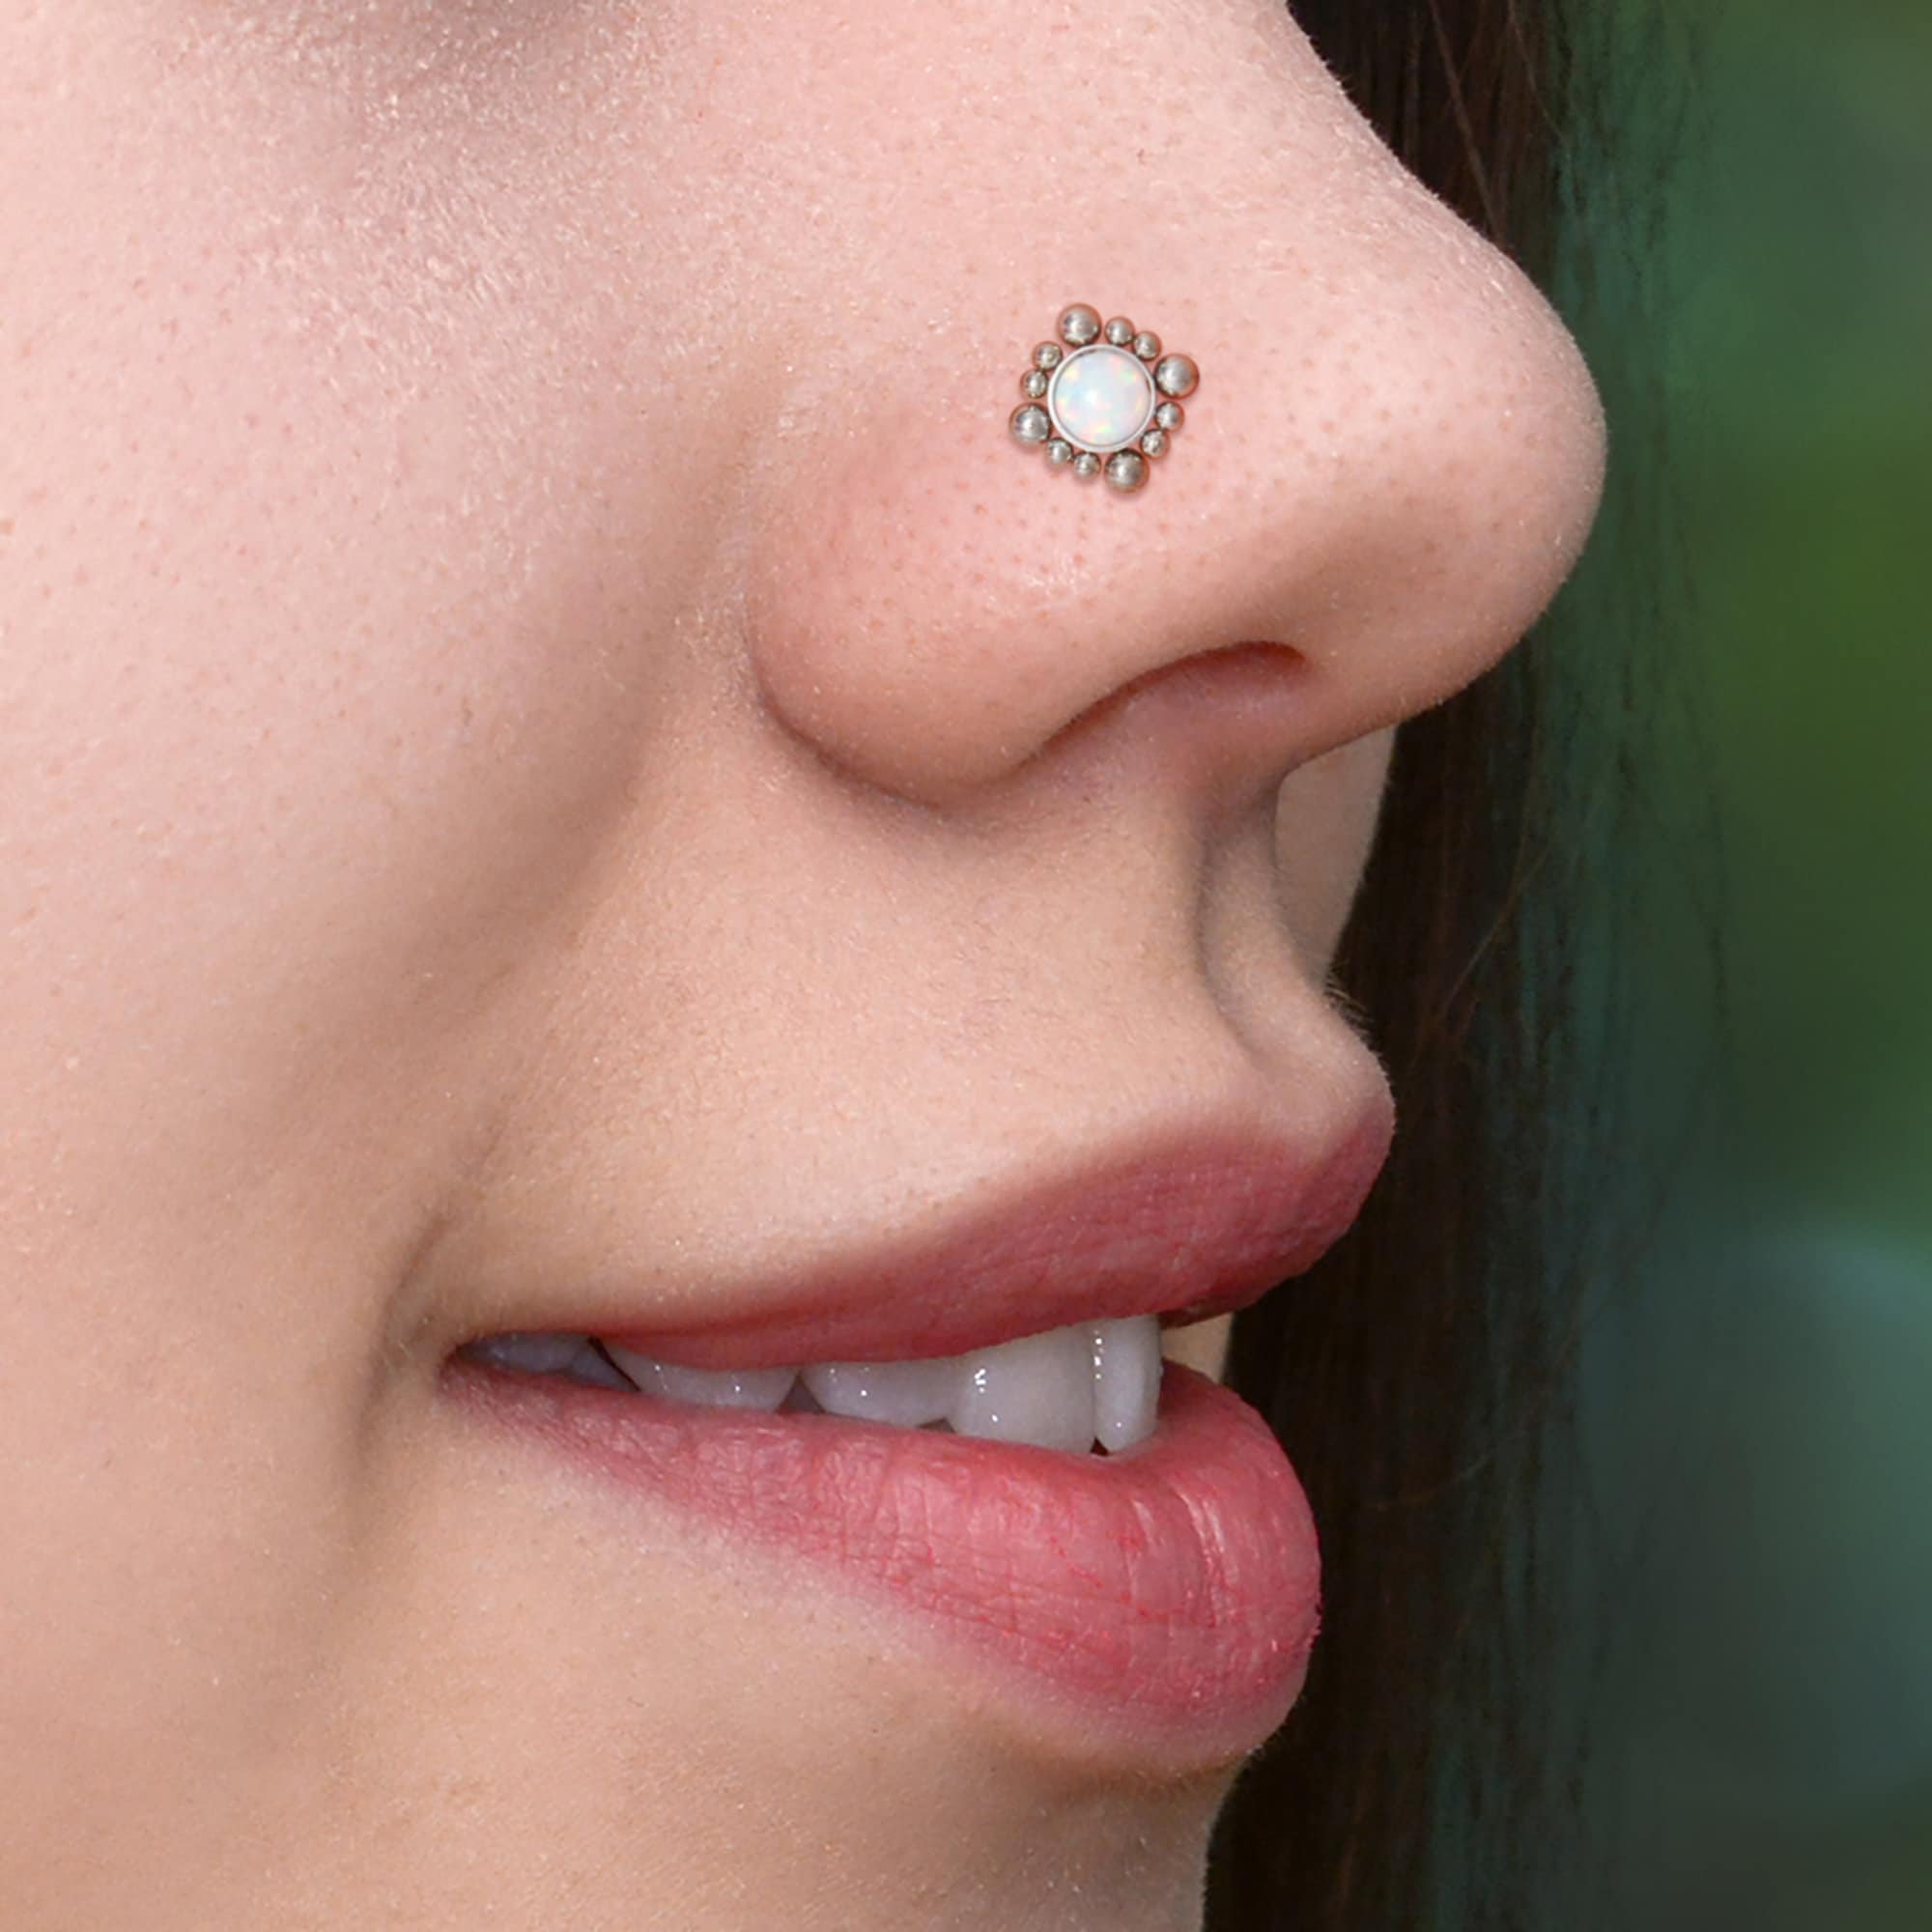 Surgical Steel Nose Stud Nose Earring Nostril Ring Nose Ring Stud 22g 20g 18g 16g Nose Piercing Nose Jewelry Sapphire Nose Screw 